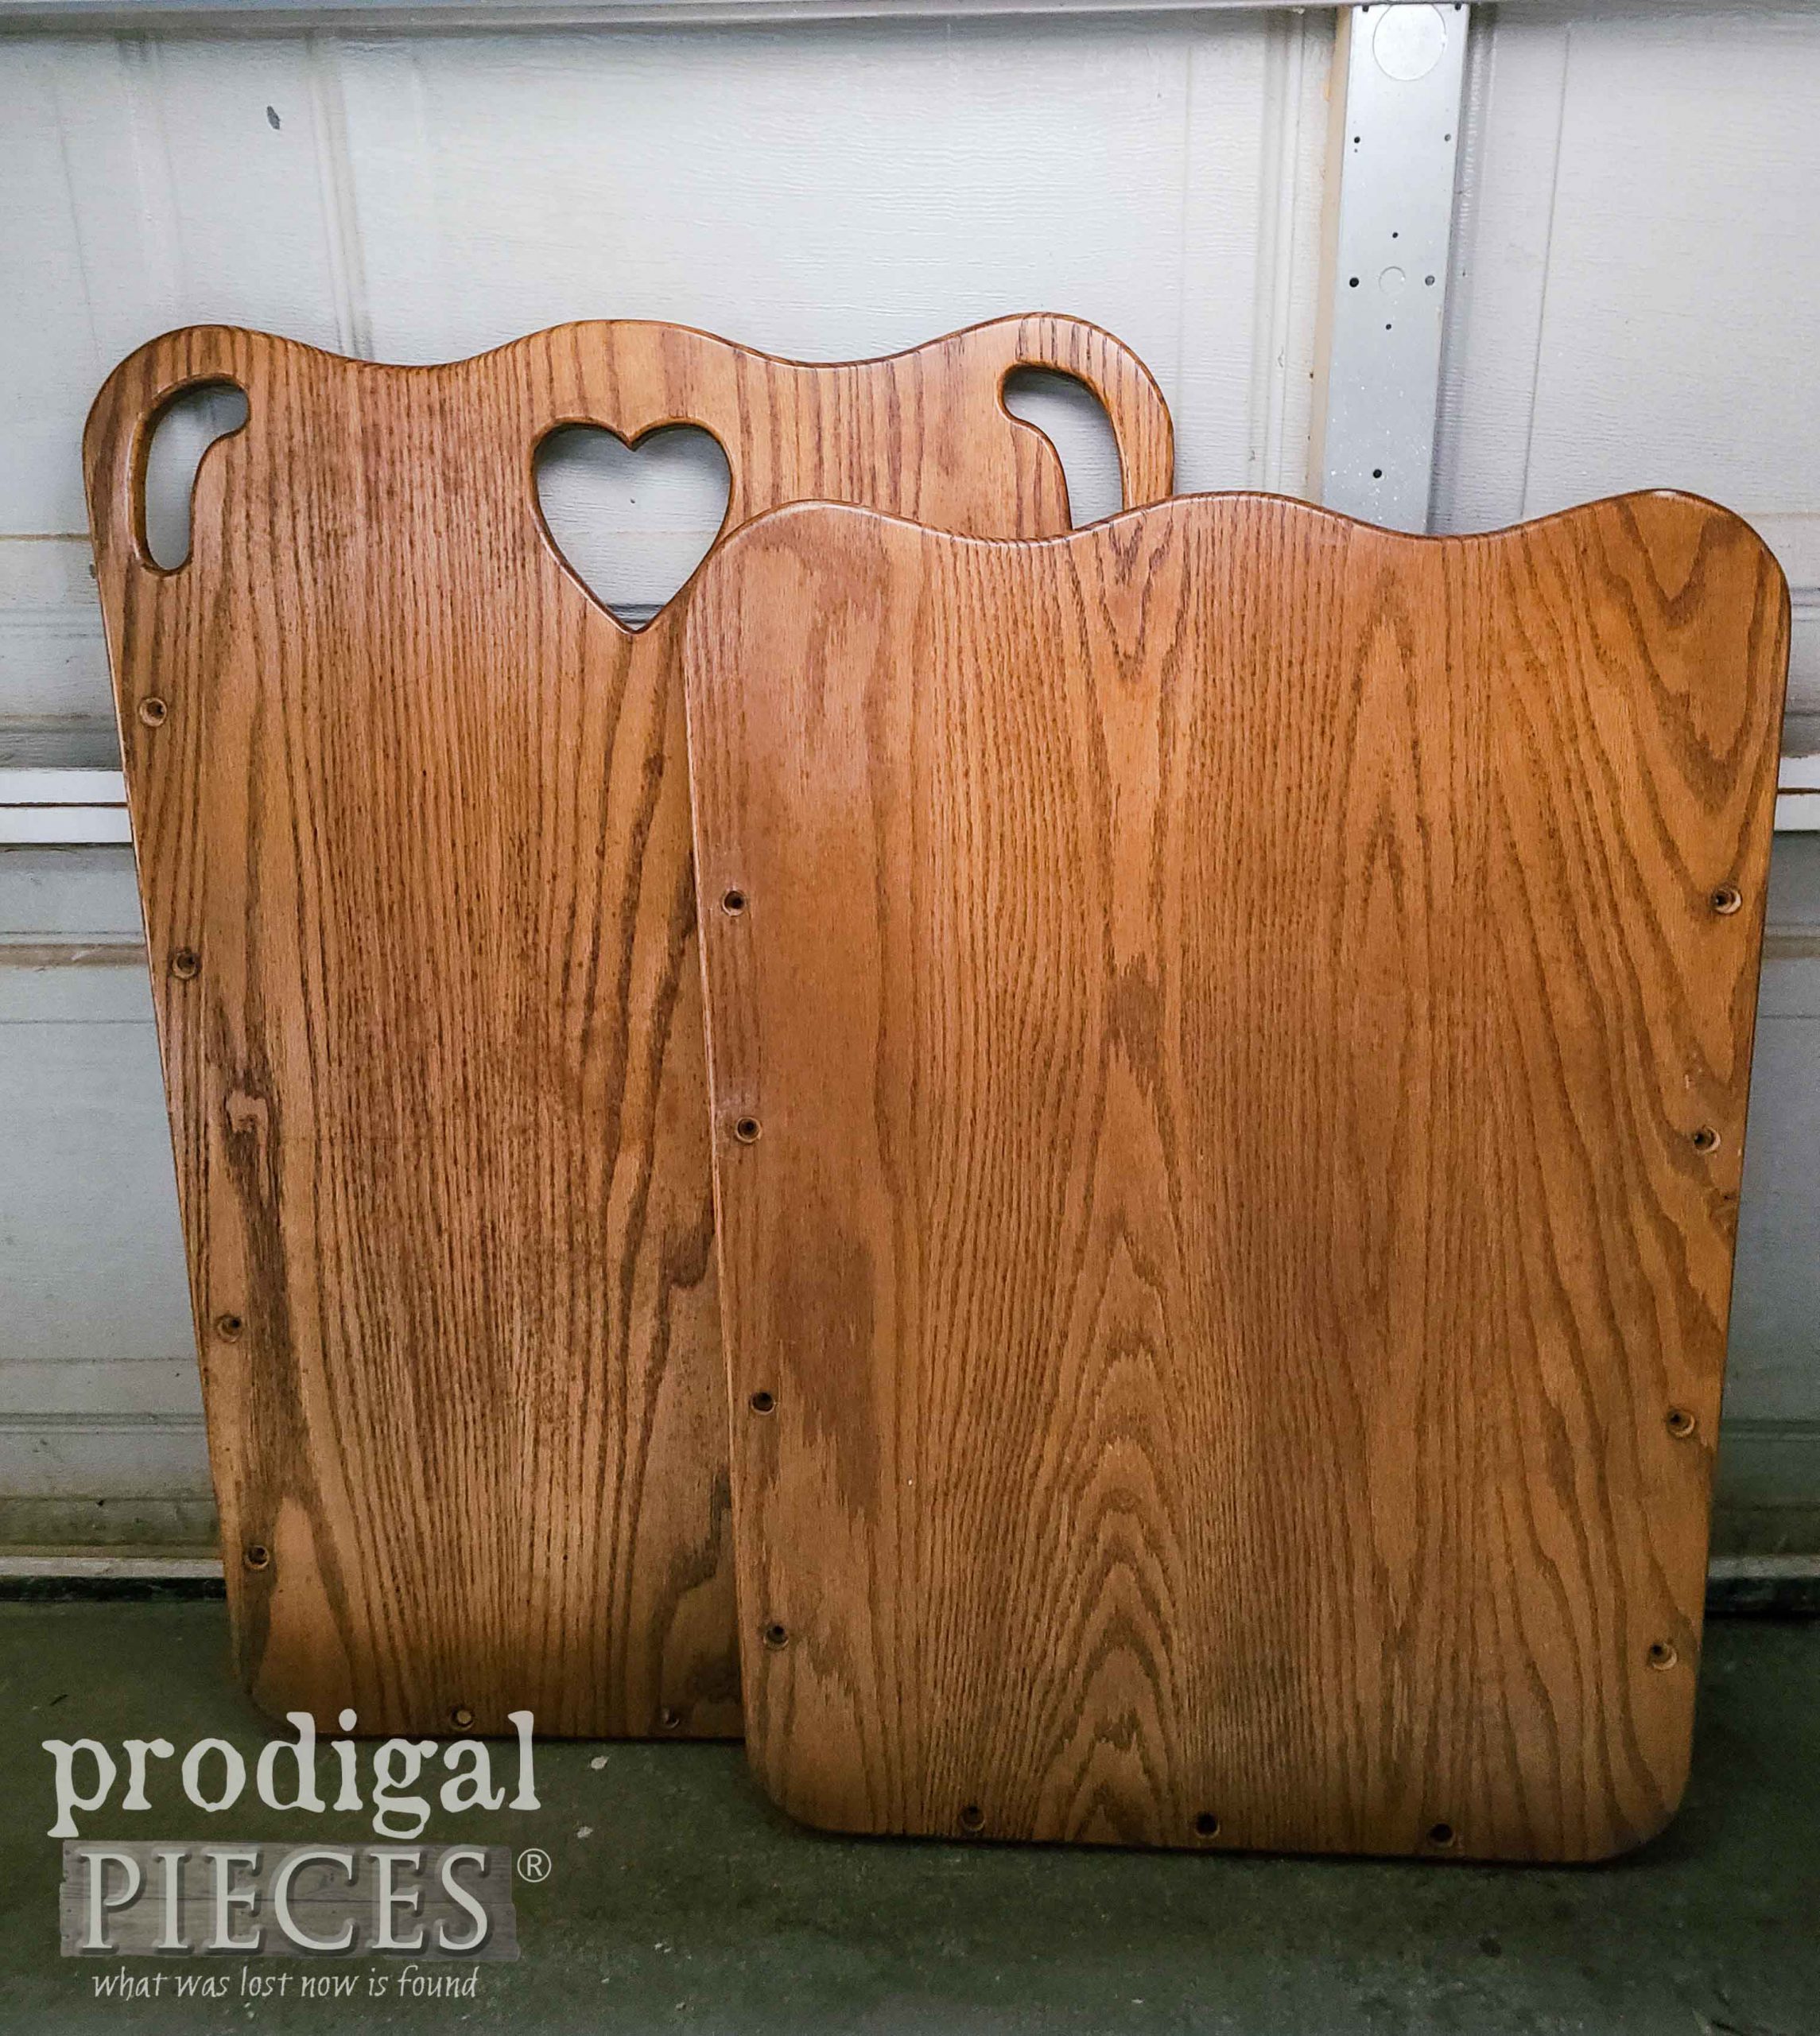 Upcycled Broken Cradle Ends Before | prodigalpieces.com